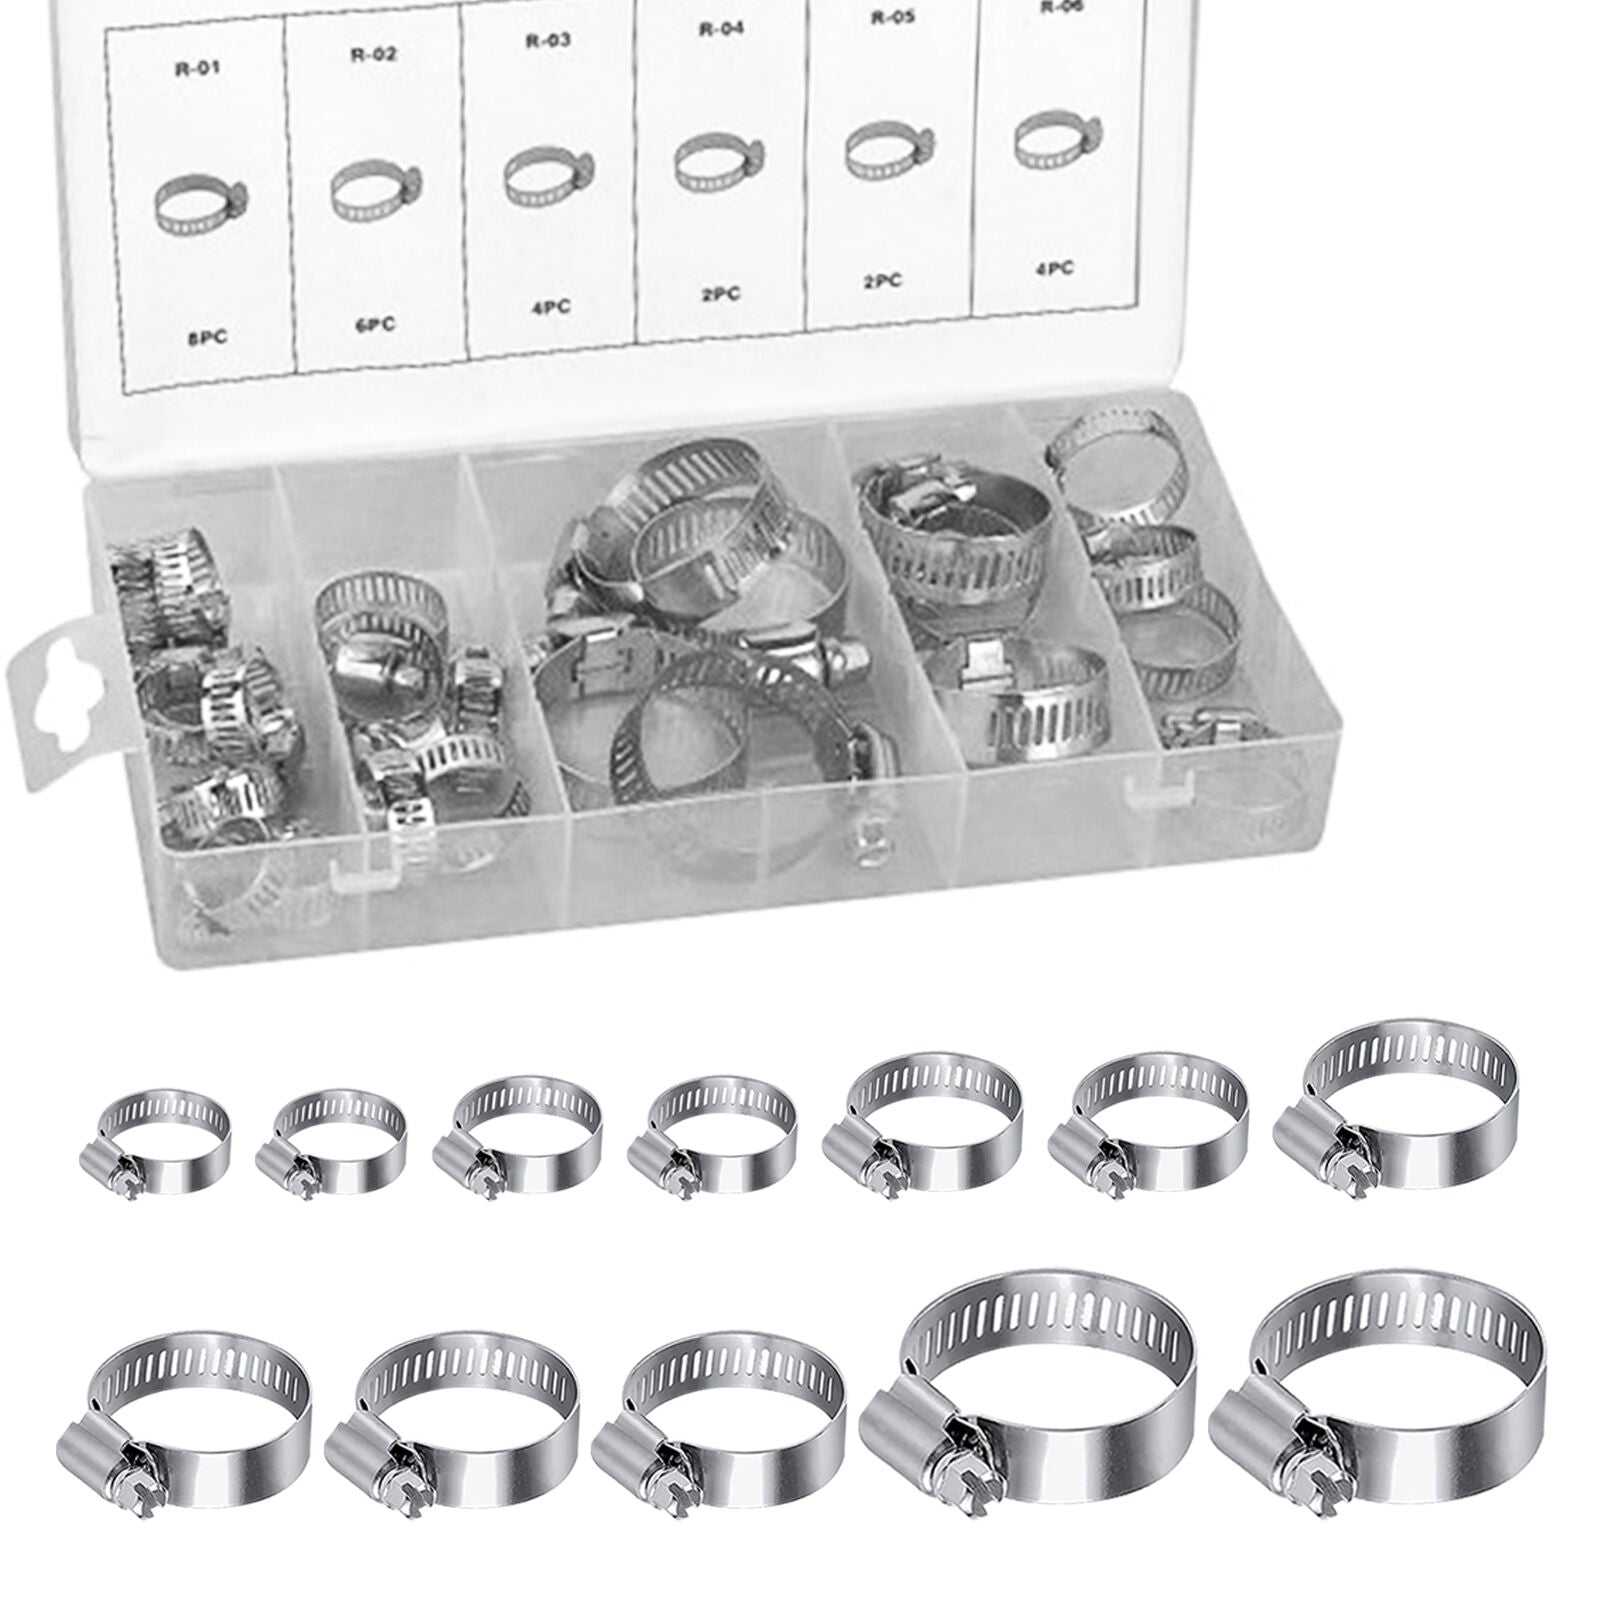 26 Piece Hose Clamp Assortment Kit - South East Clearance Centre